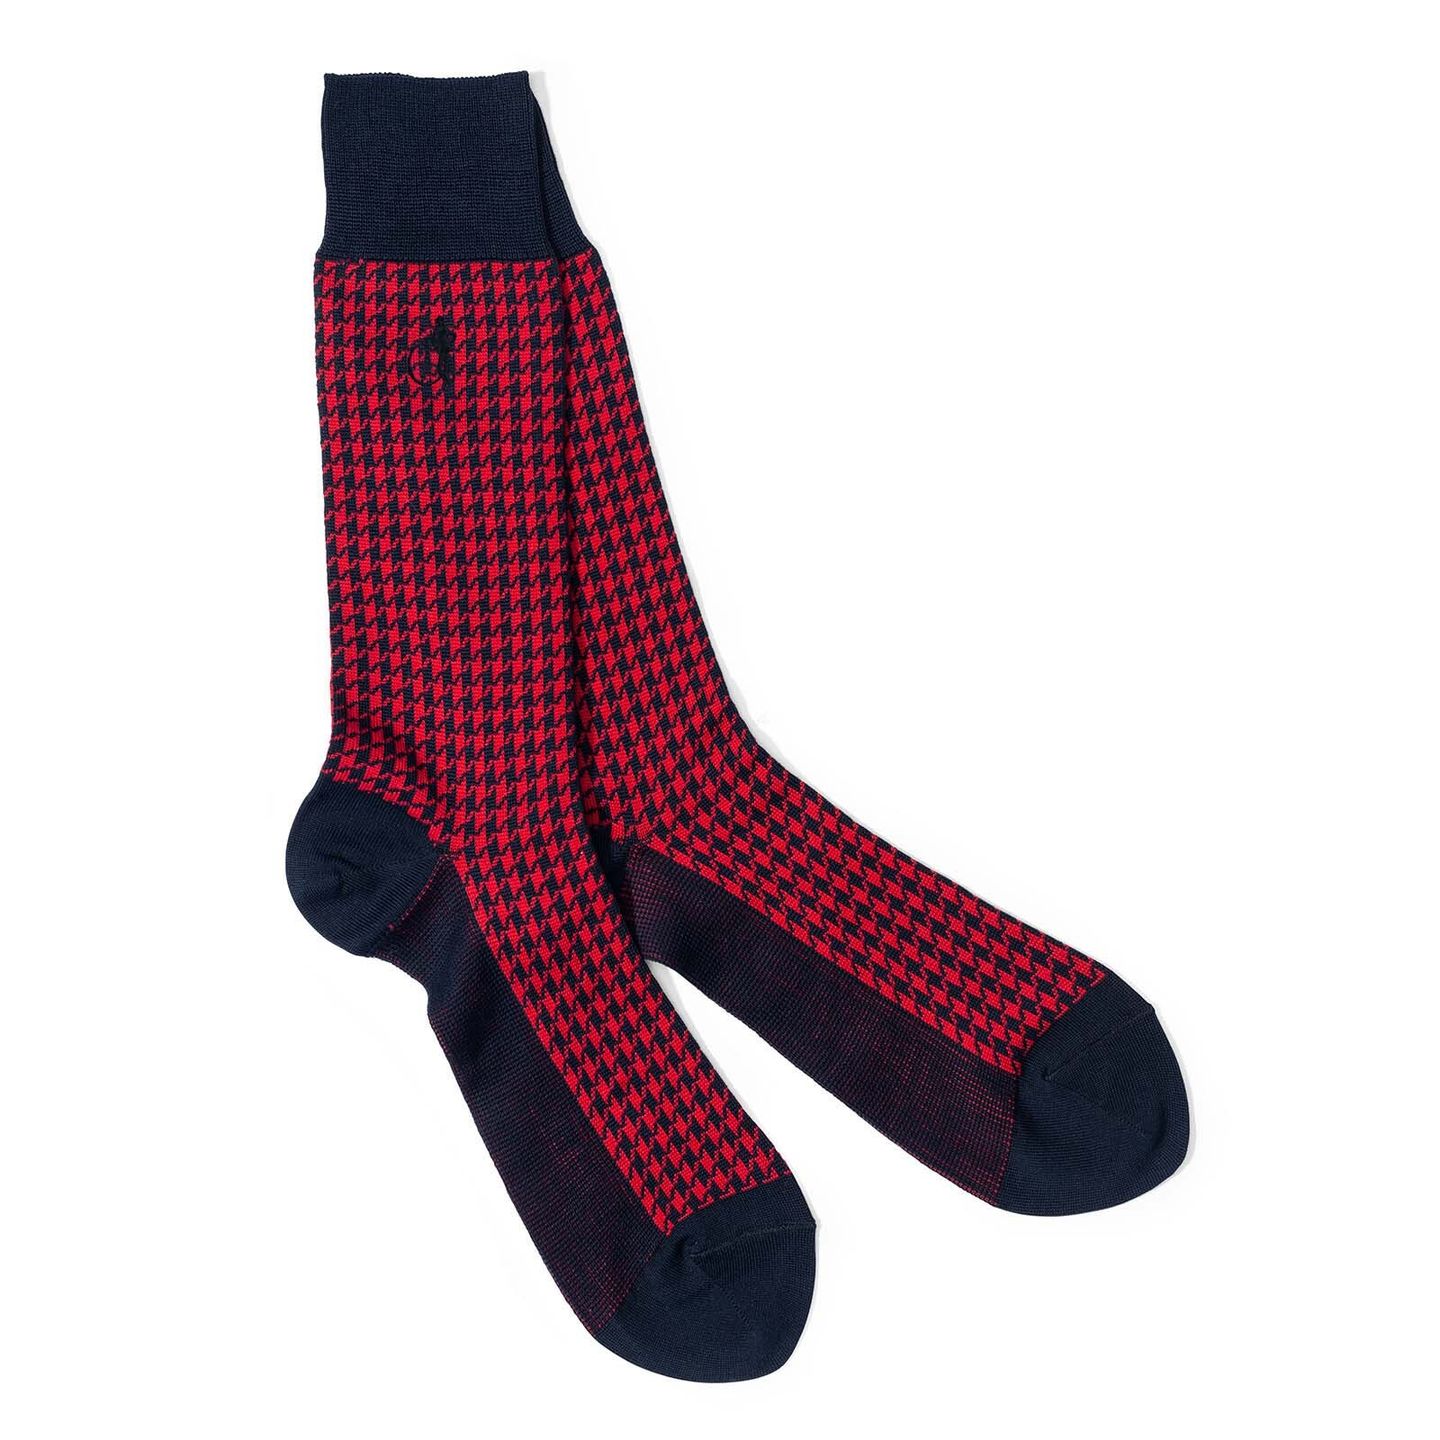 Black and red chequered socks in the Houndtooth pattern